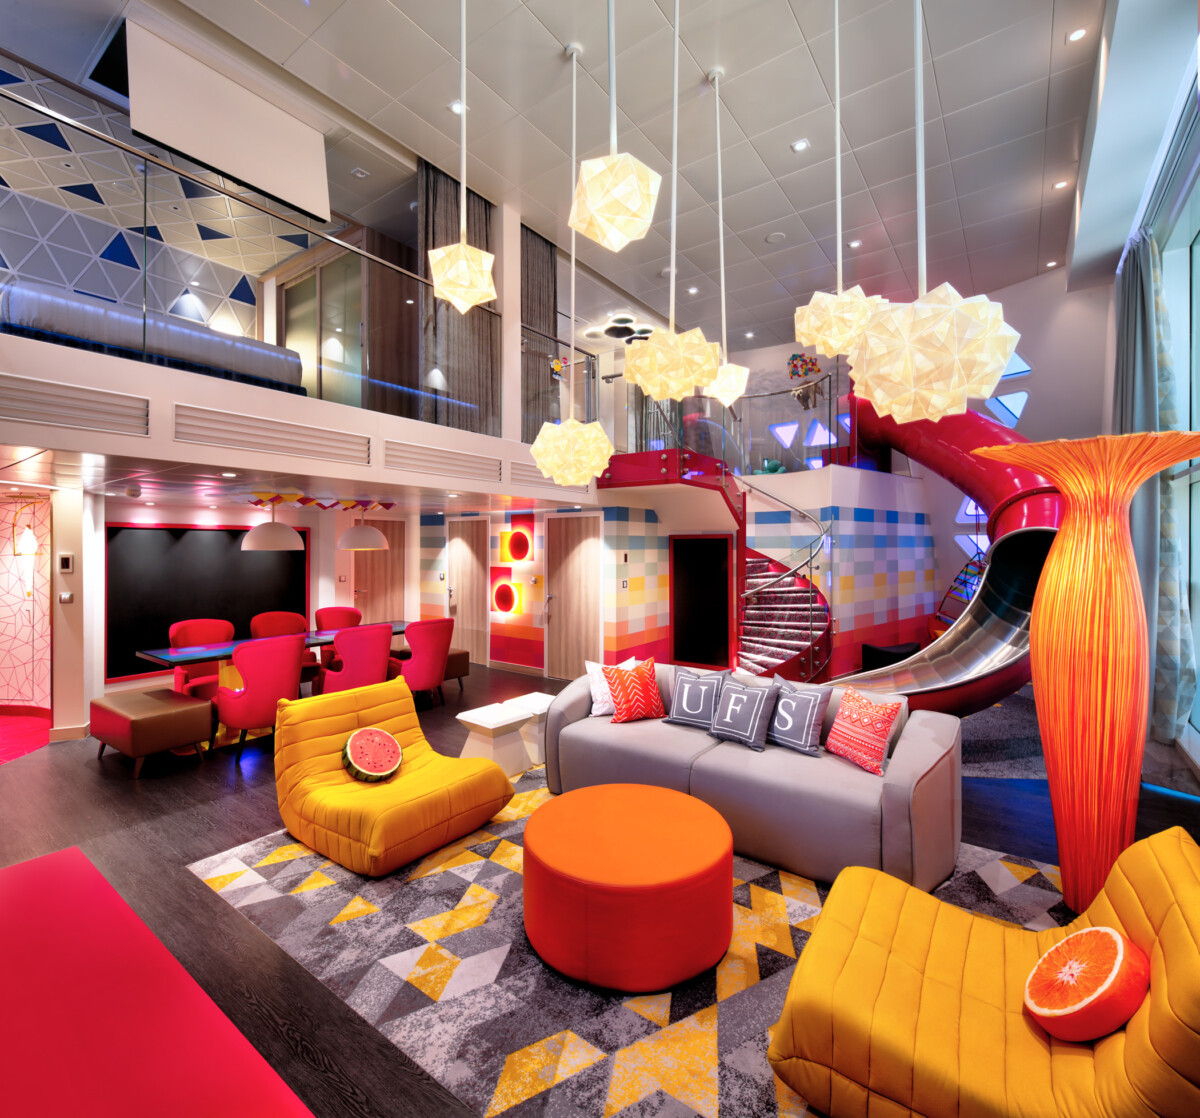 Ultimate Family Suite on Royal Caribbean's Wonder of the Seas.